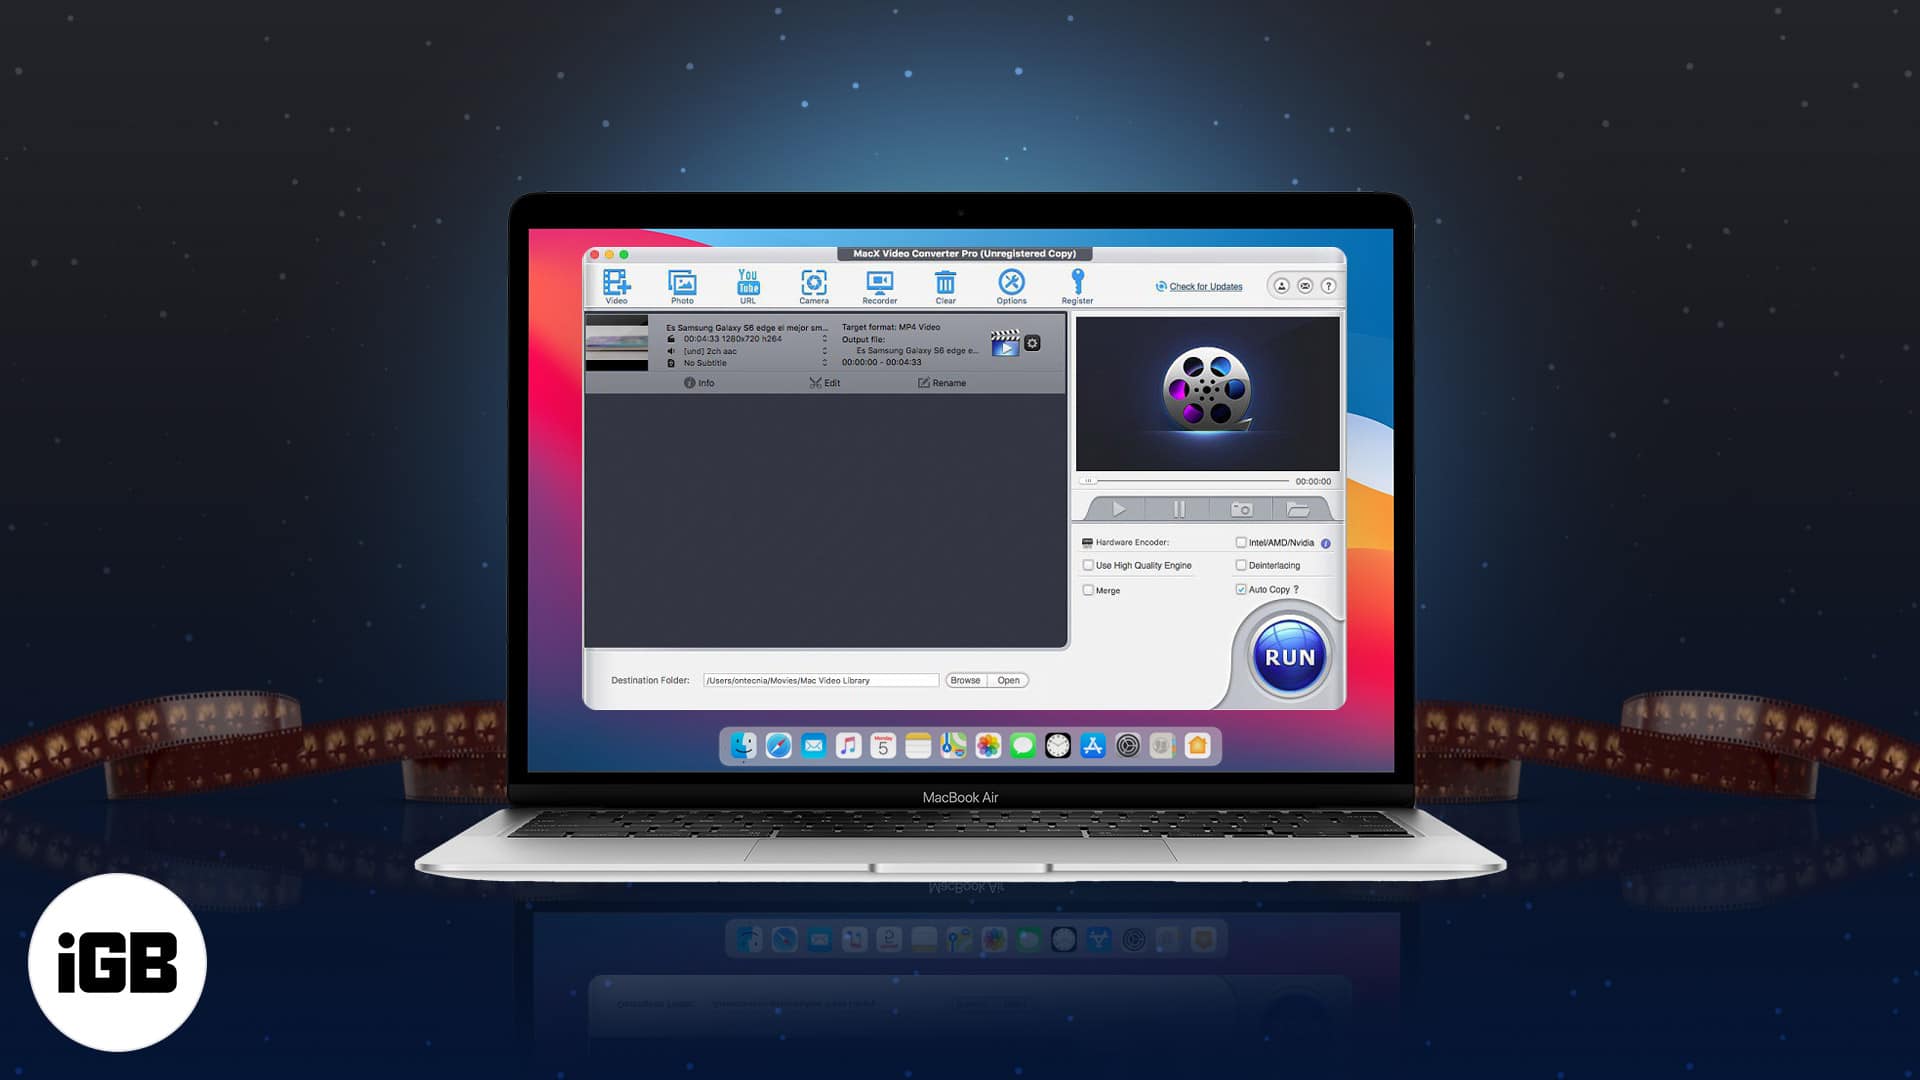 freeware video converter to mov files for mac